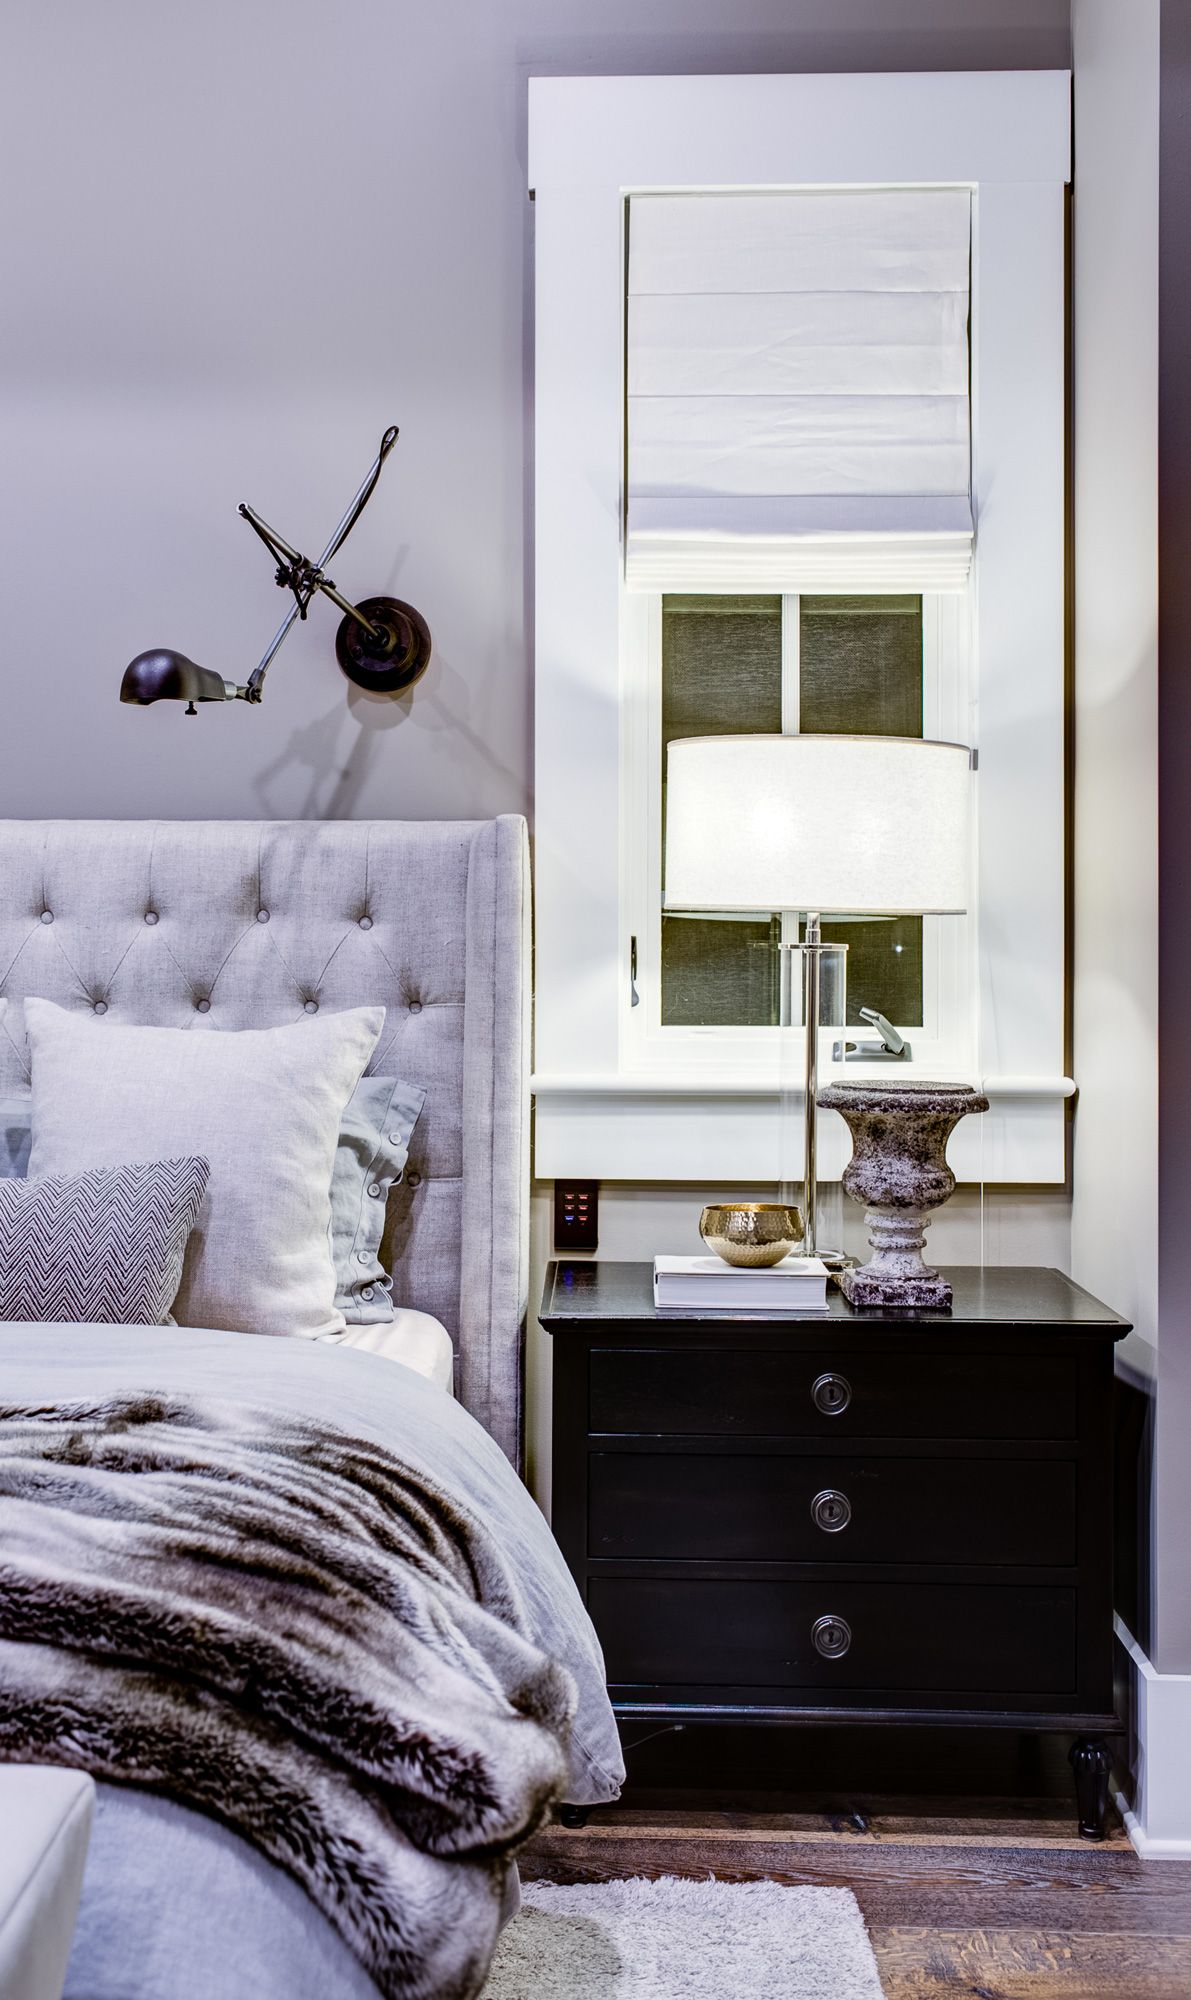 Bedside Tables For Your Bedroom S Decor, Nightstand With Shelves Above